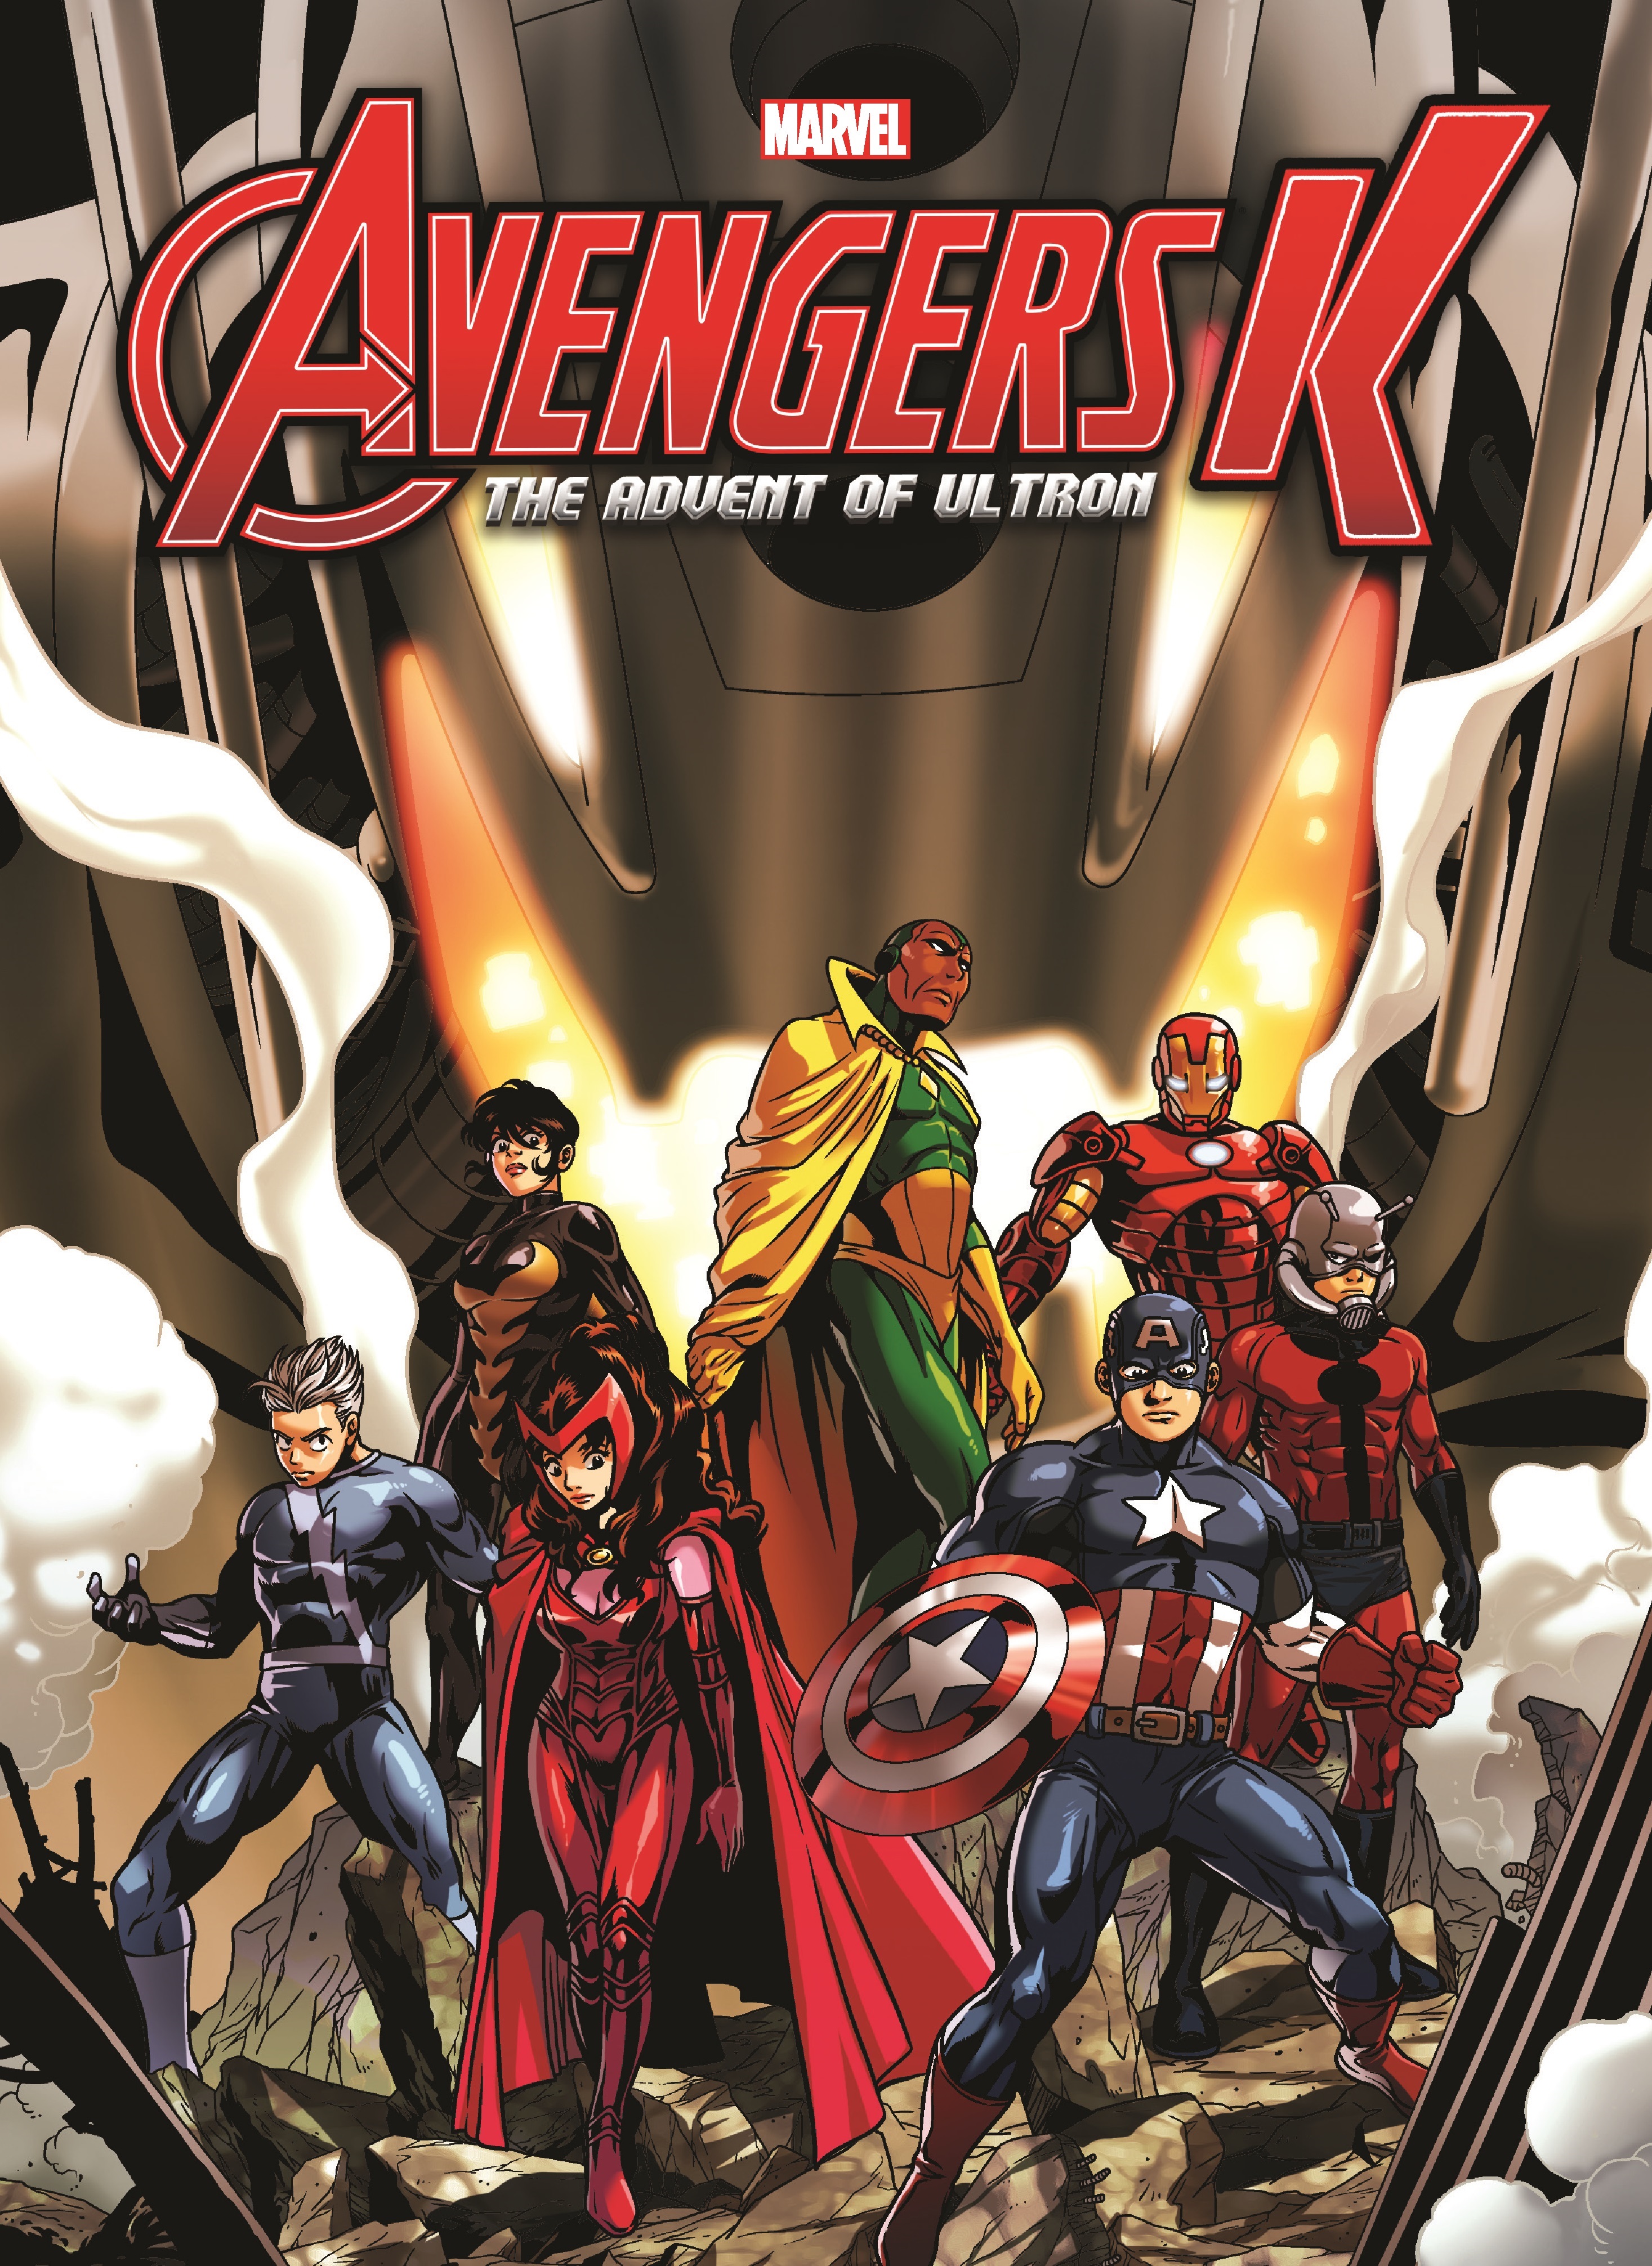 Avengers K Book 2: The Advent of Ultron (Trade Paperback)